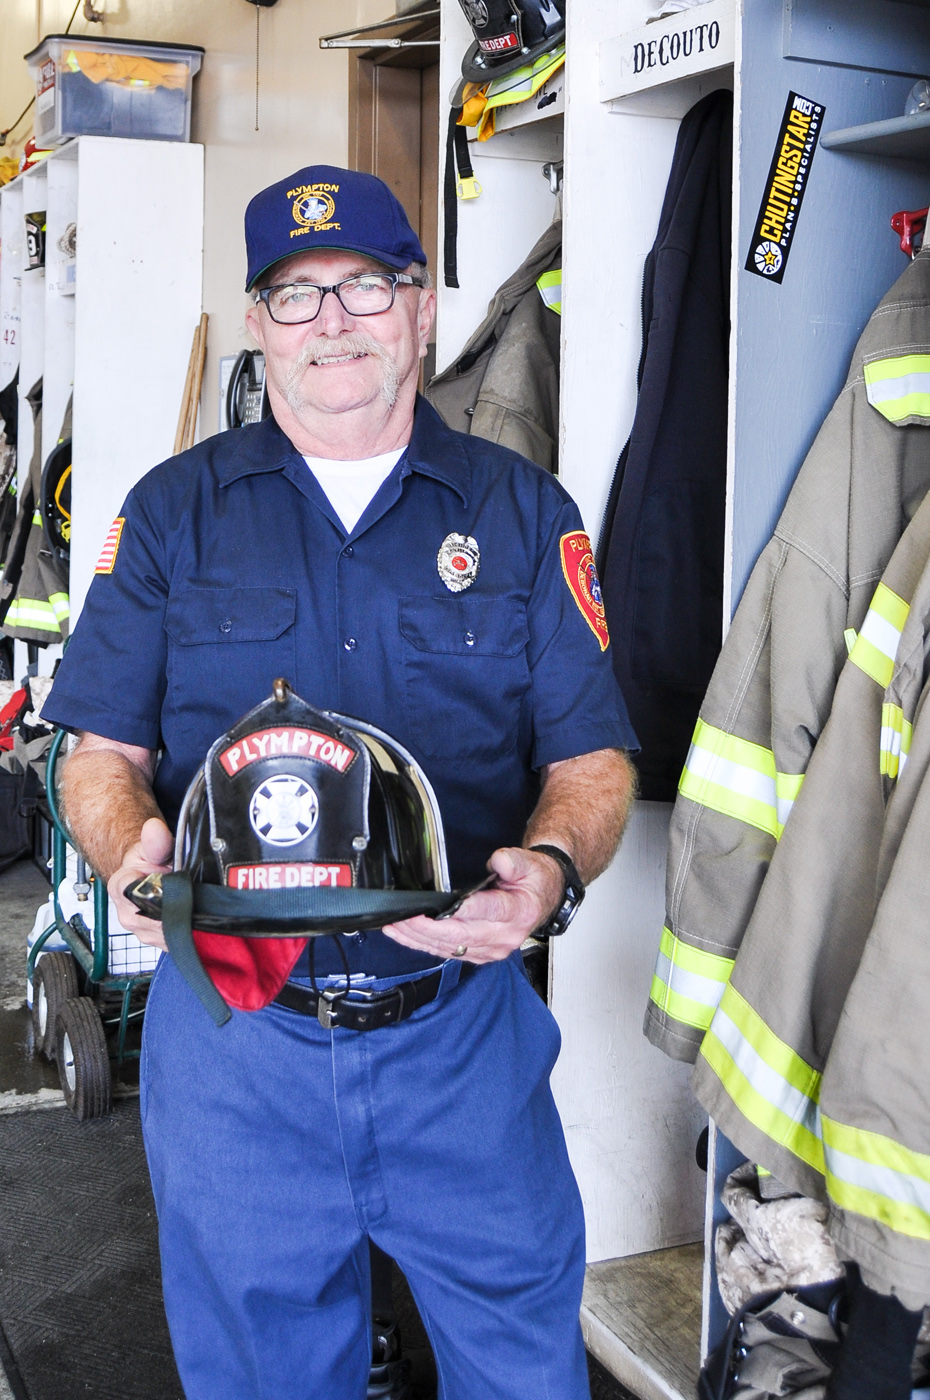 Last Call for George Colby, call firefighter, retiring - Plympton ...